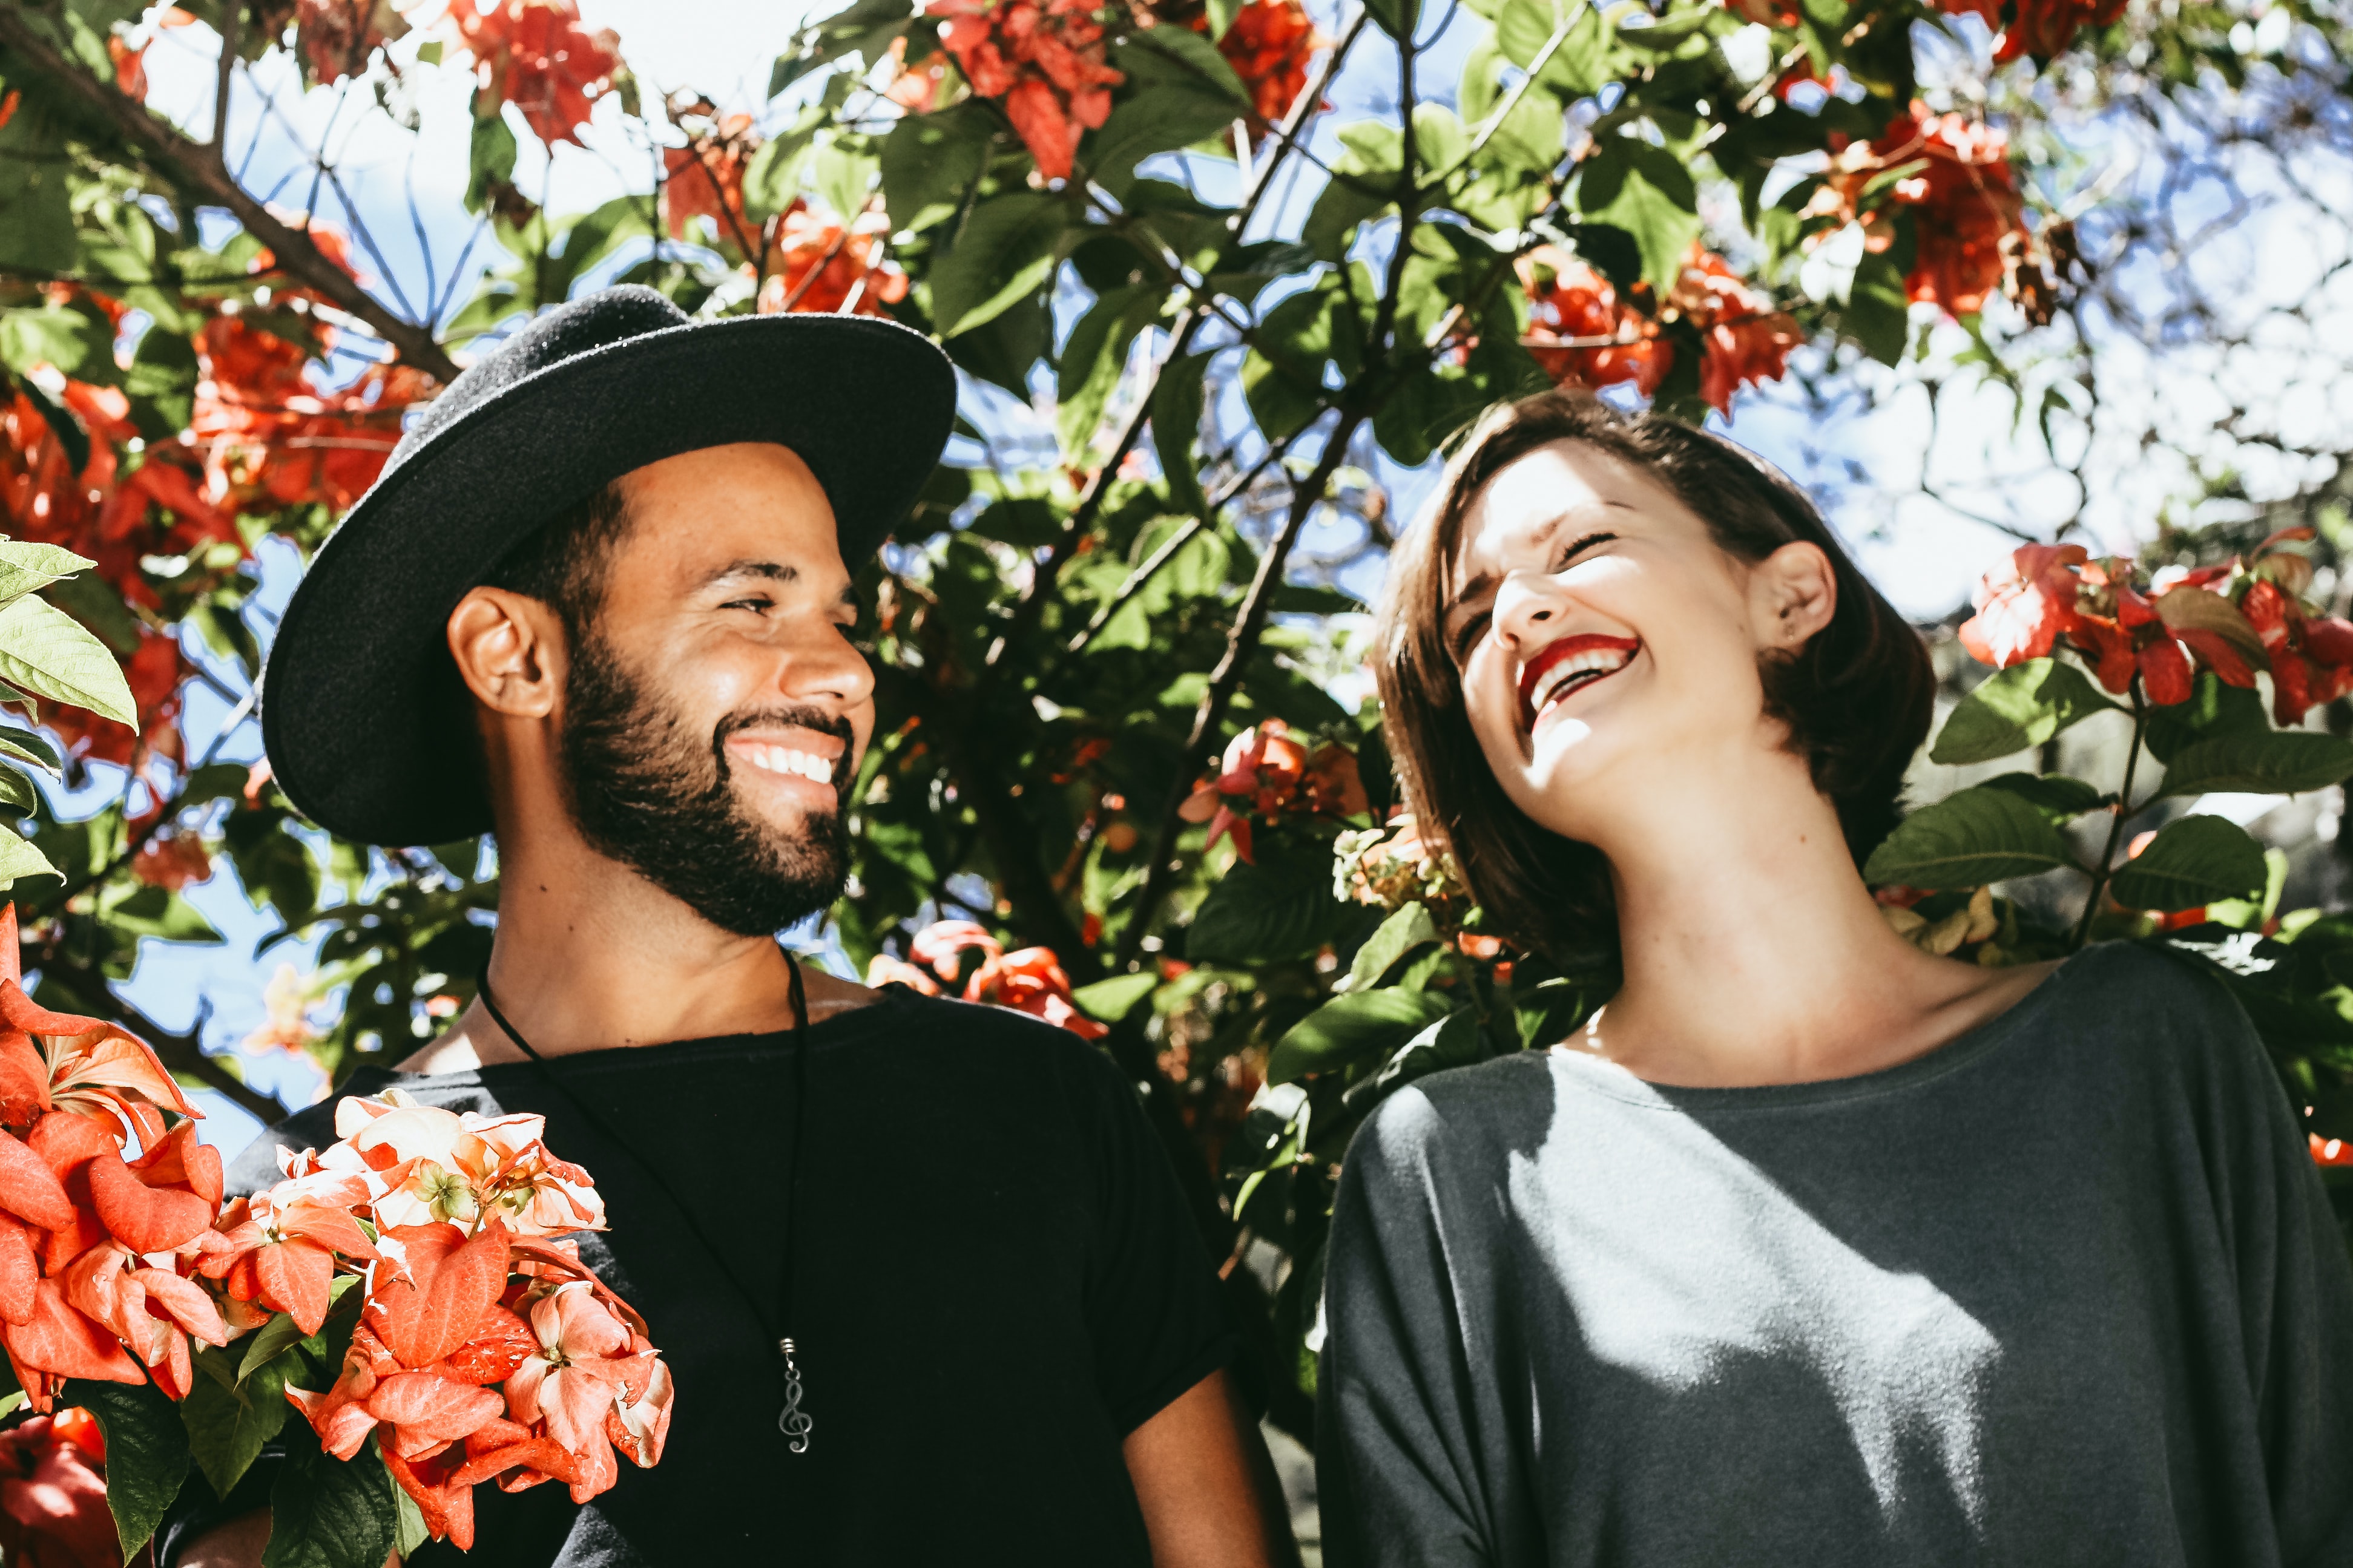 Image of an attractive man and woman with stylish clothes laughing looking at each other surrounded by red flowers.